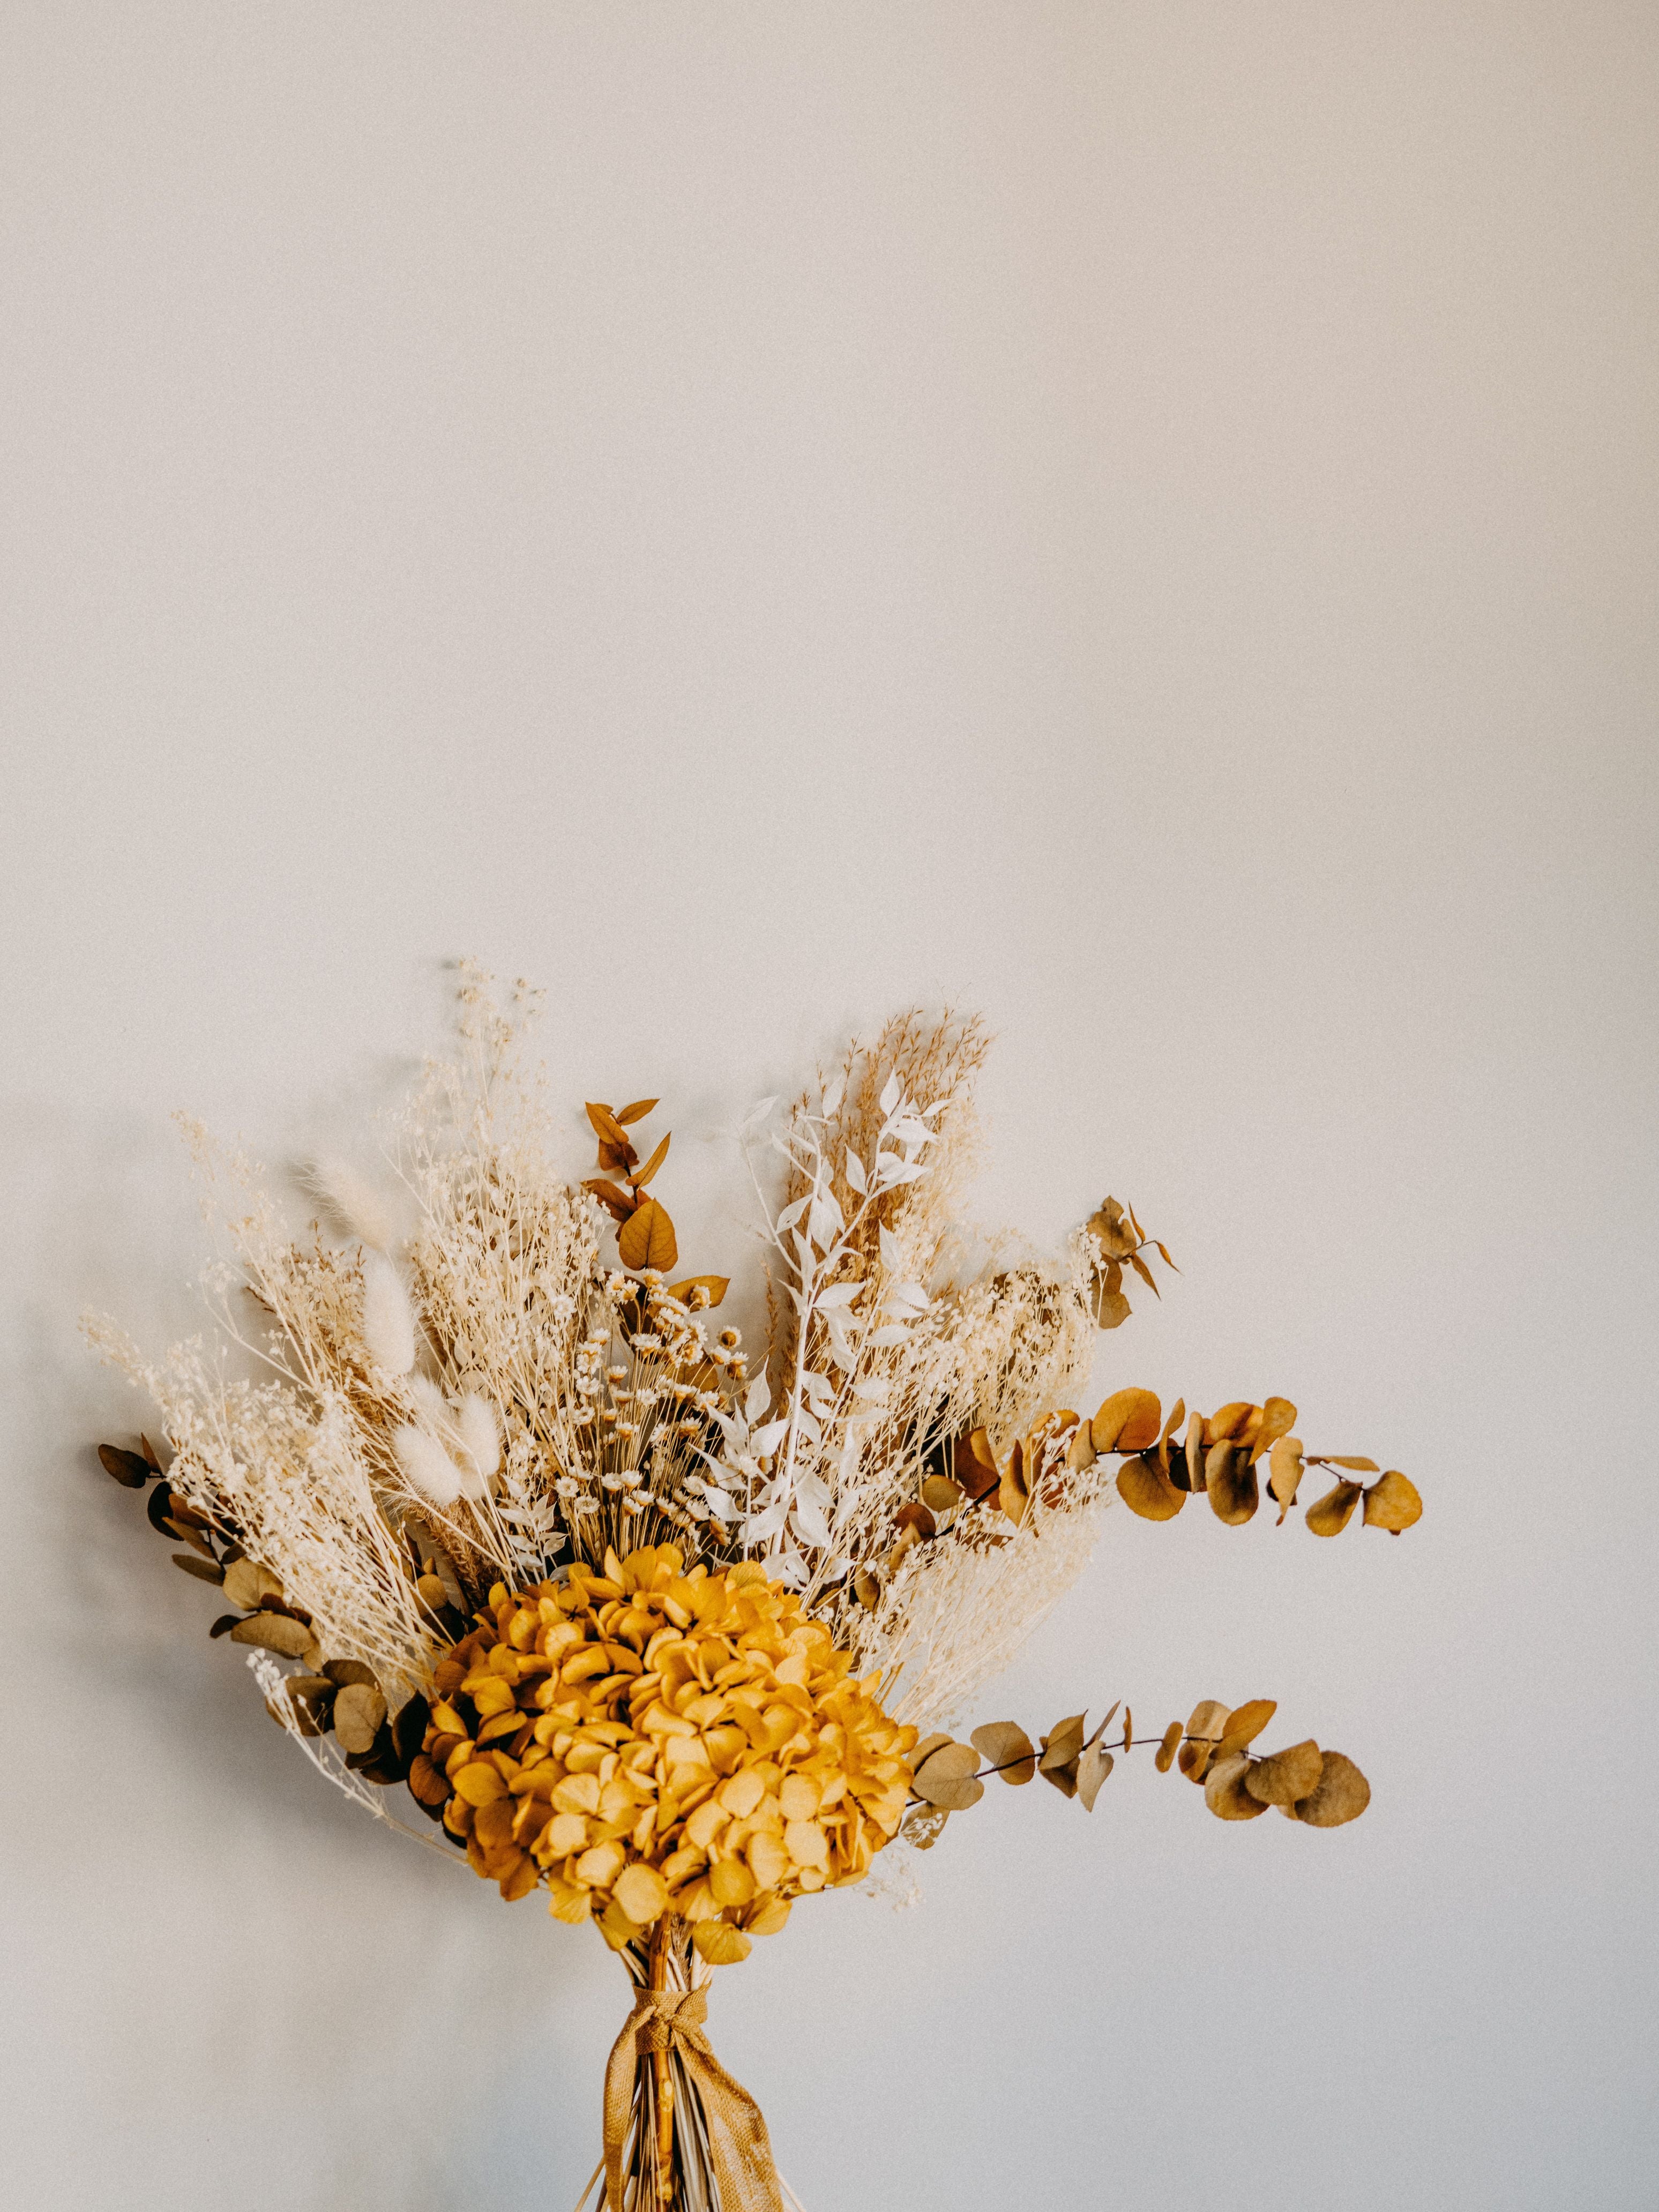 How Long Do Dried Flowers Last?